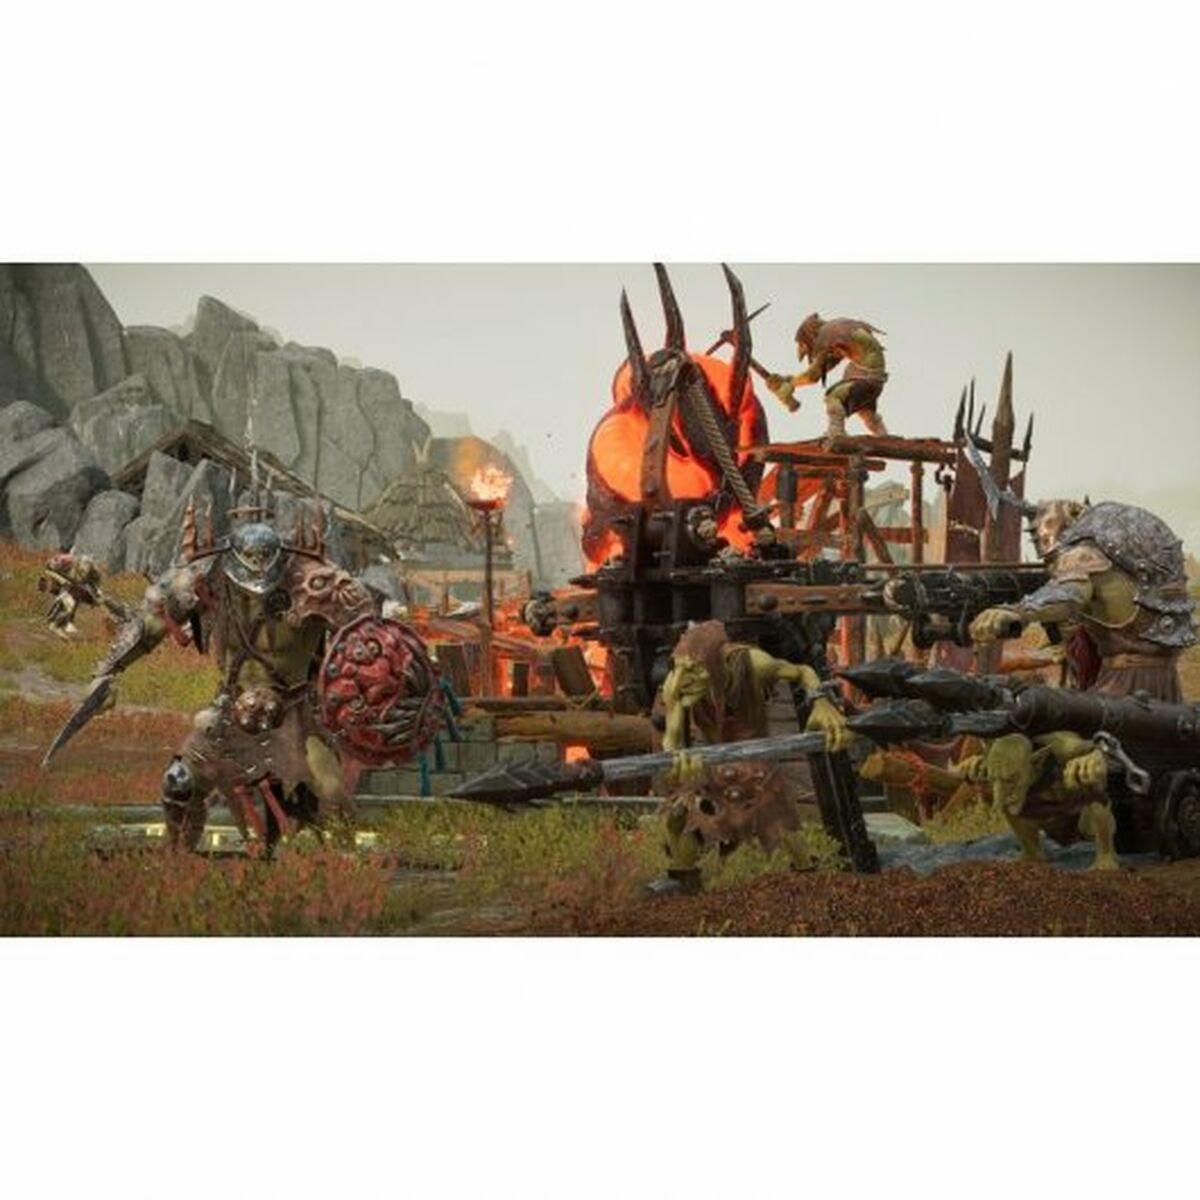 Videospiel Xbox Series X Bumble3ee Warhammer Age of Sigmar: Realms of Ruin